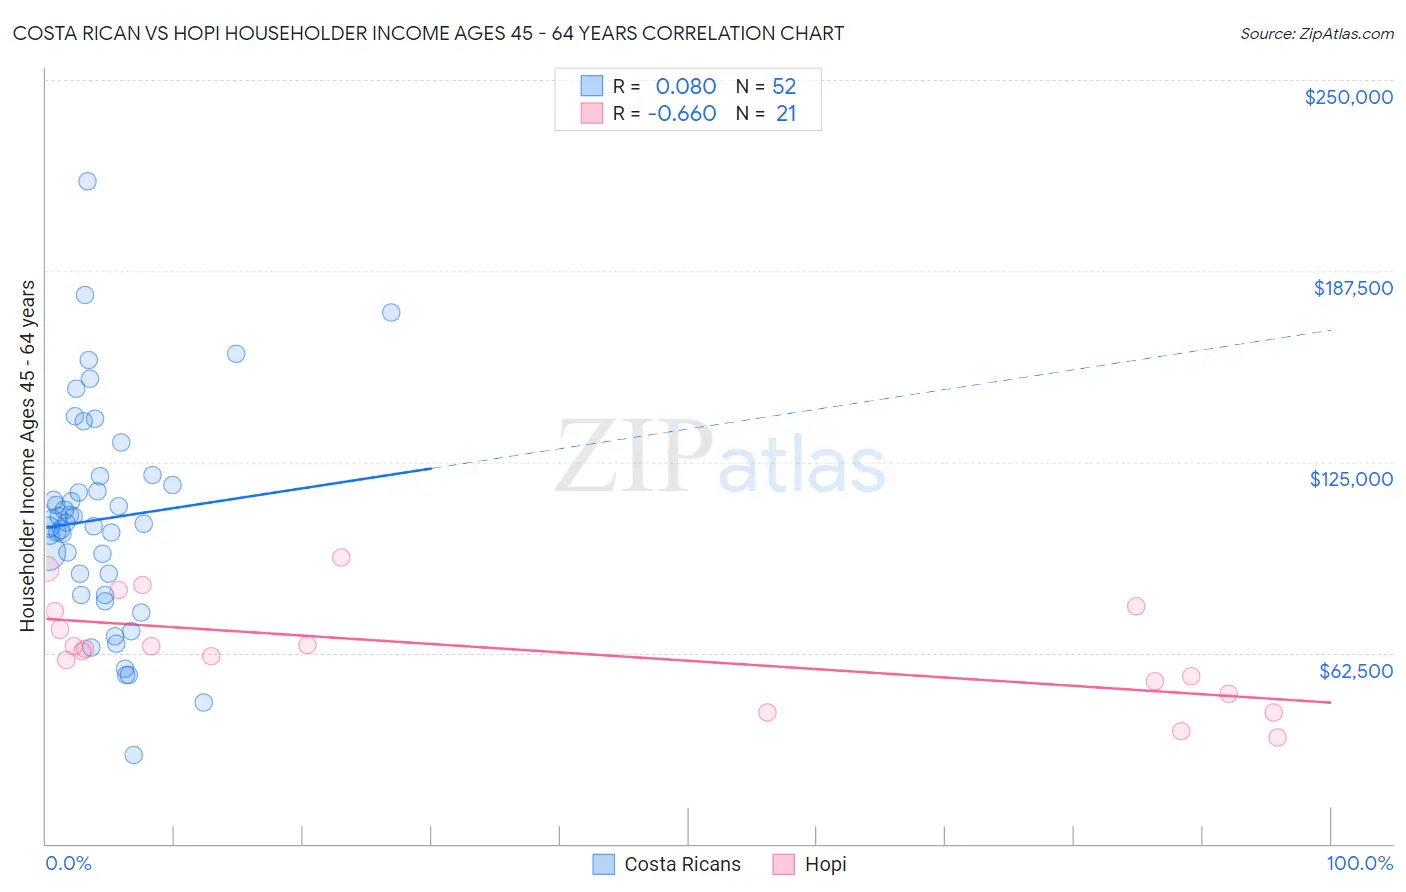 Costa Rican vs Hopi Householder Income Ages 45 - 64 years